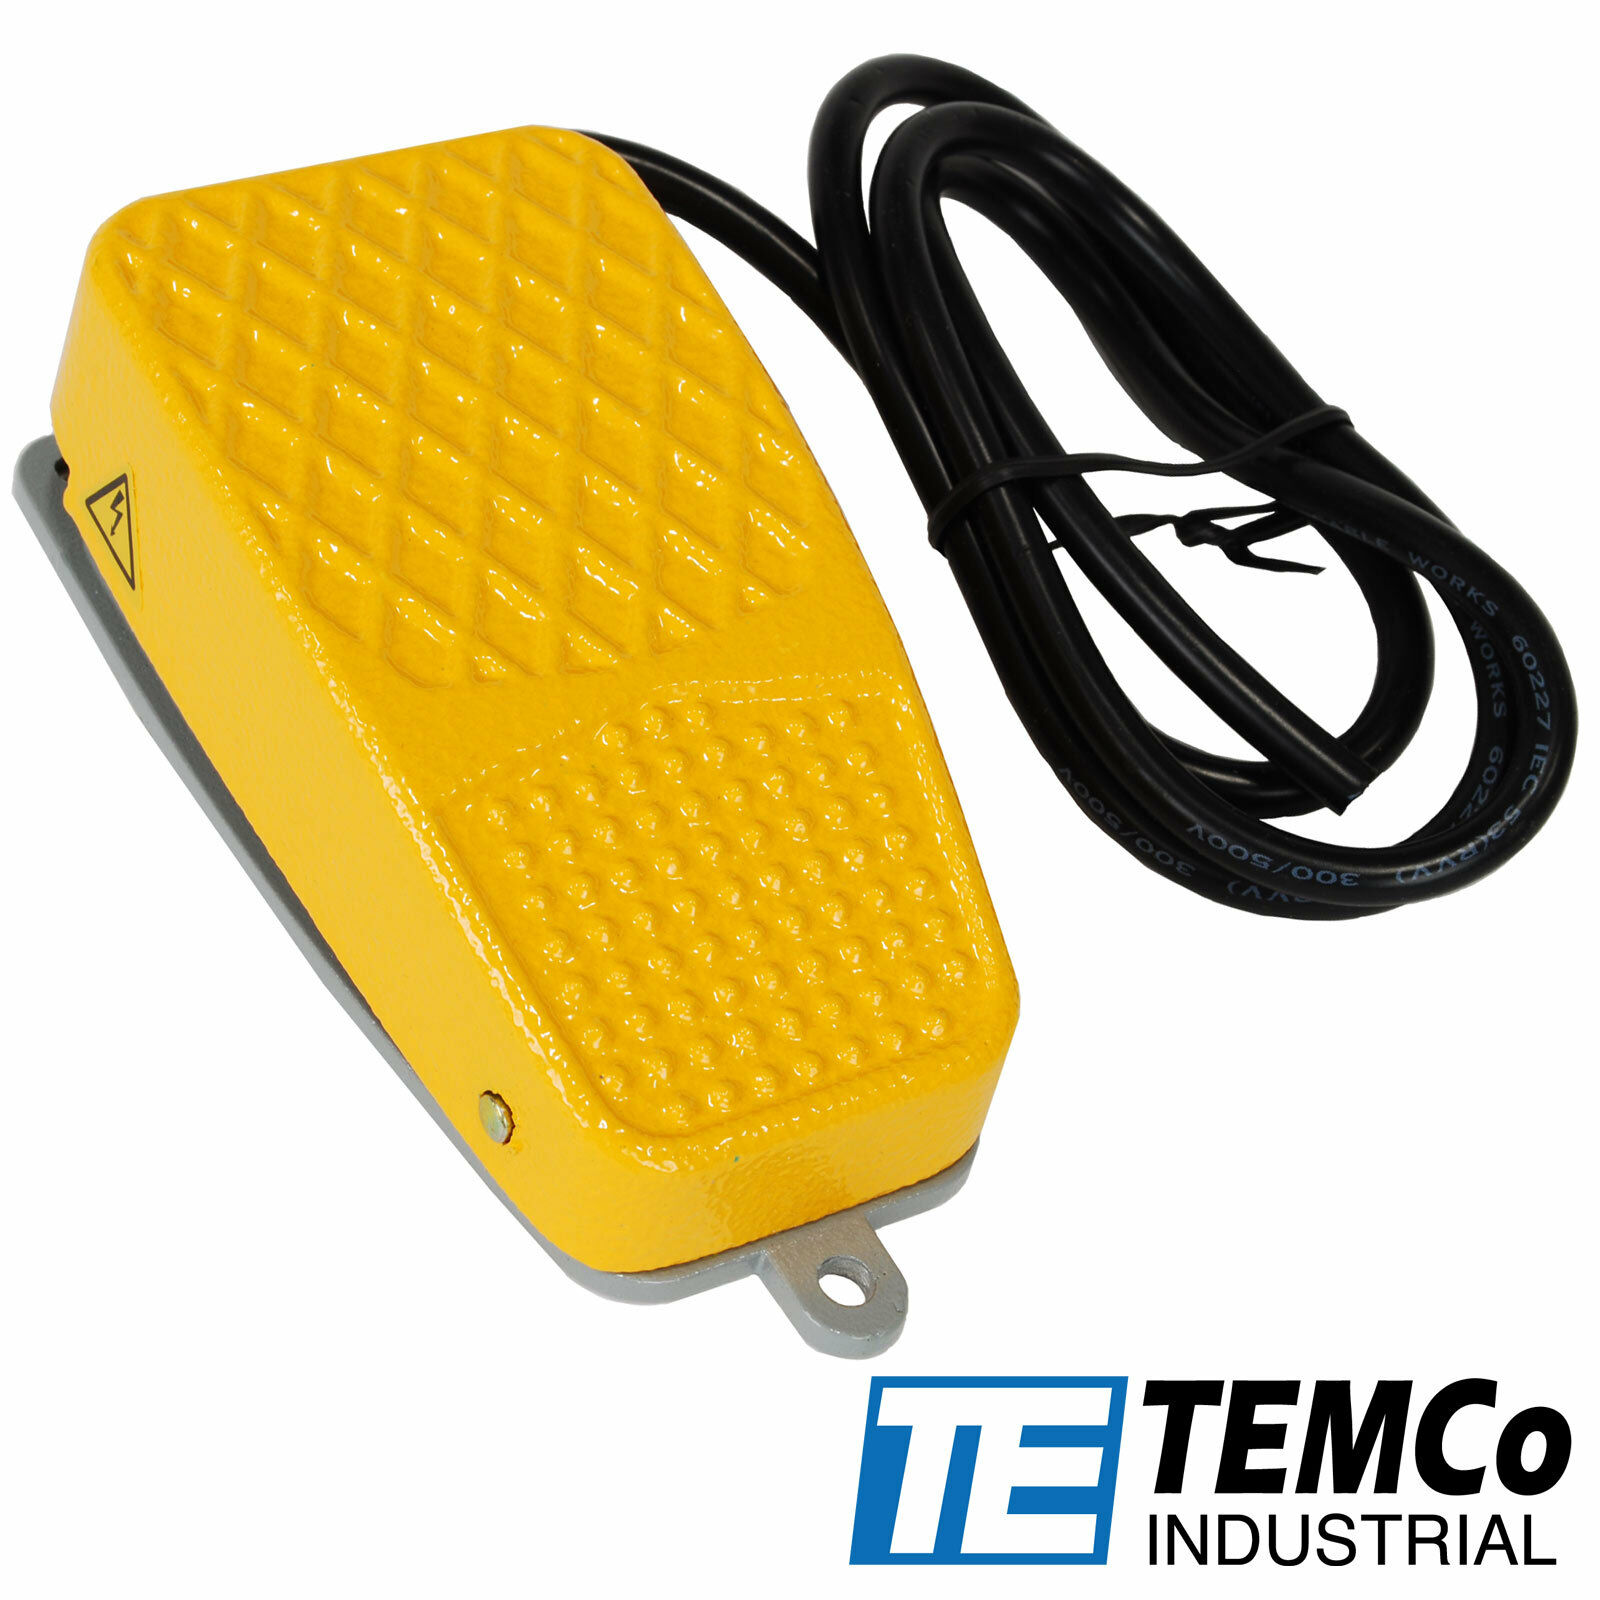 Temco Aluminum Foot Switch 10a Spdt No Nc Electric Power Pedal Momentary New Cnc